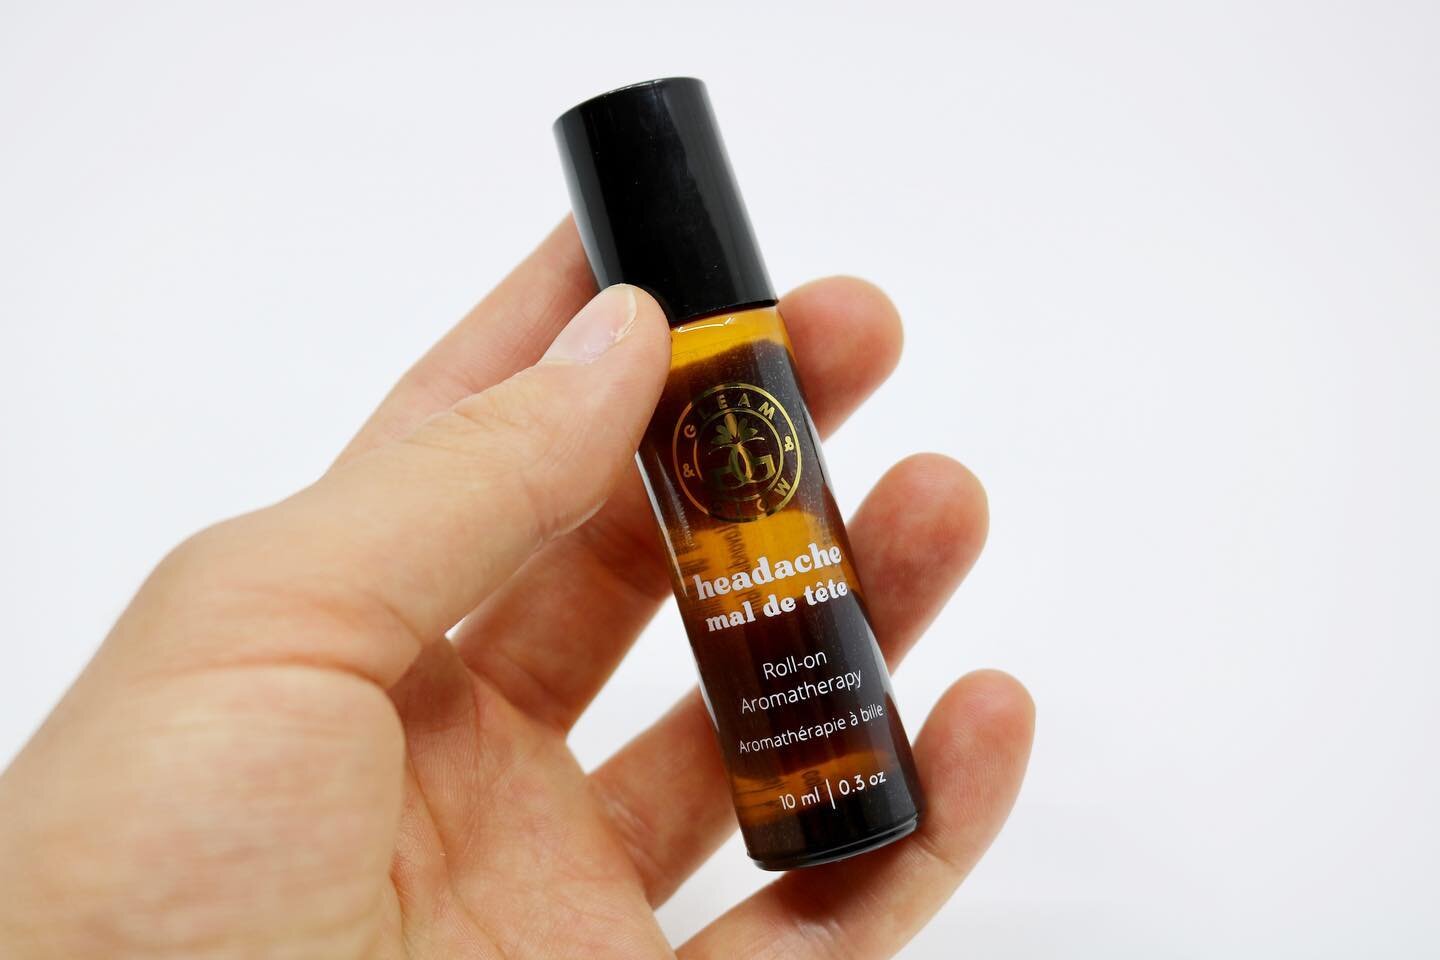 ⚡️PRODUCT DROP⚡️

Introducing the headache roll on ✨

A natural plant-based headache-relieving aromatherapy roll-on stick, formulated to relieve pain and calm the mind 😊

Free of any artificial ingredients or additives 💪

Ingredients include: 
